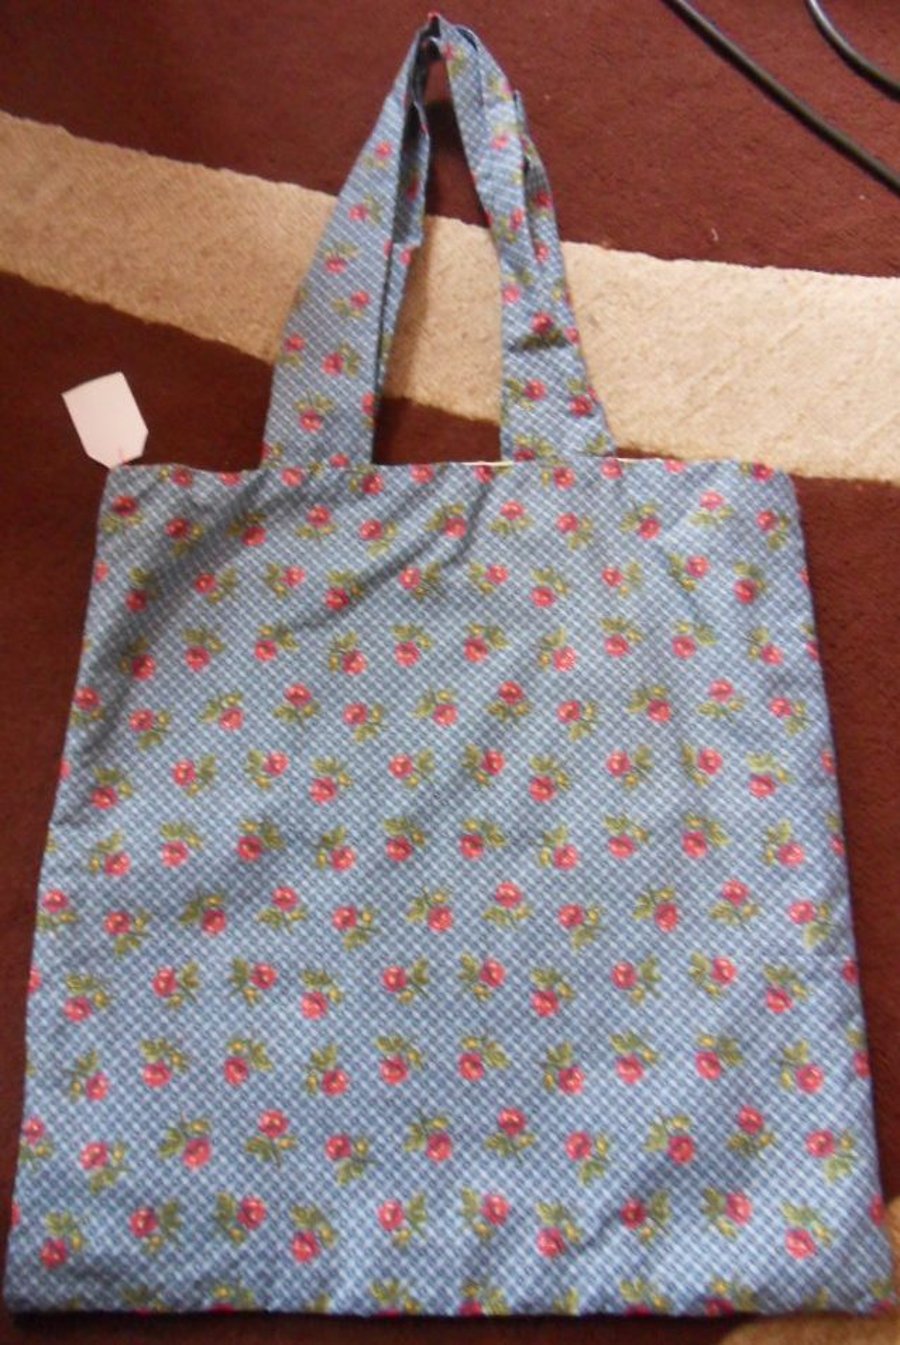 Homemade tote bag.  Red flowers on blue.  Approx measures 13" x 13"